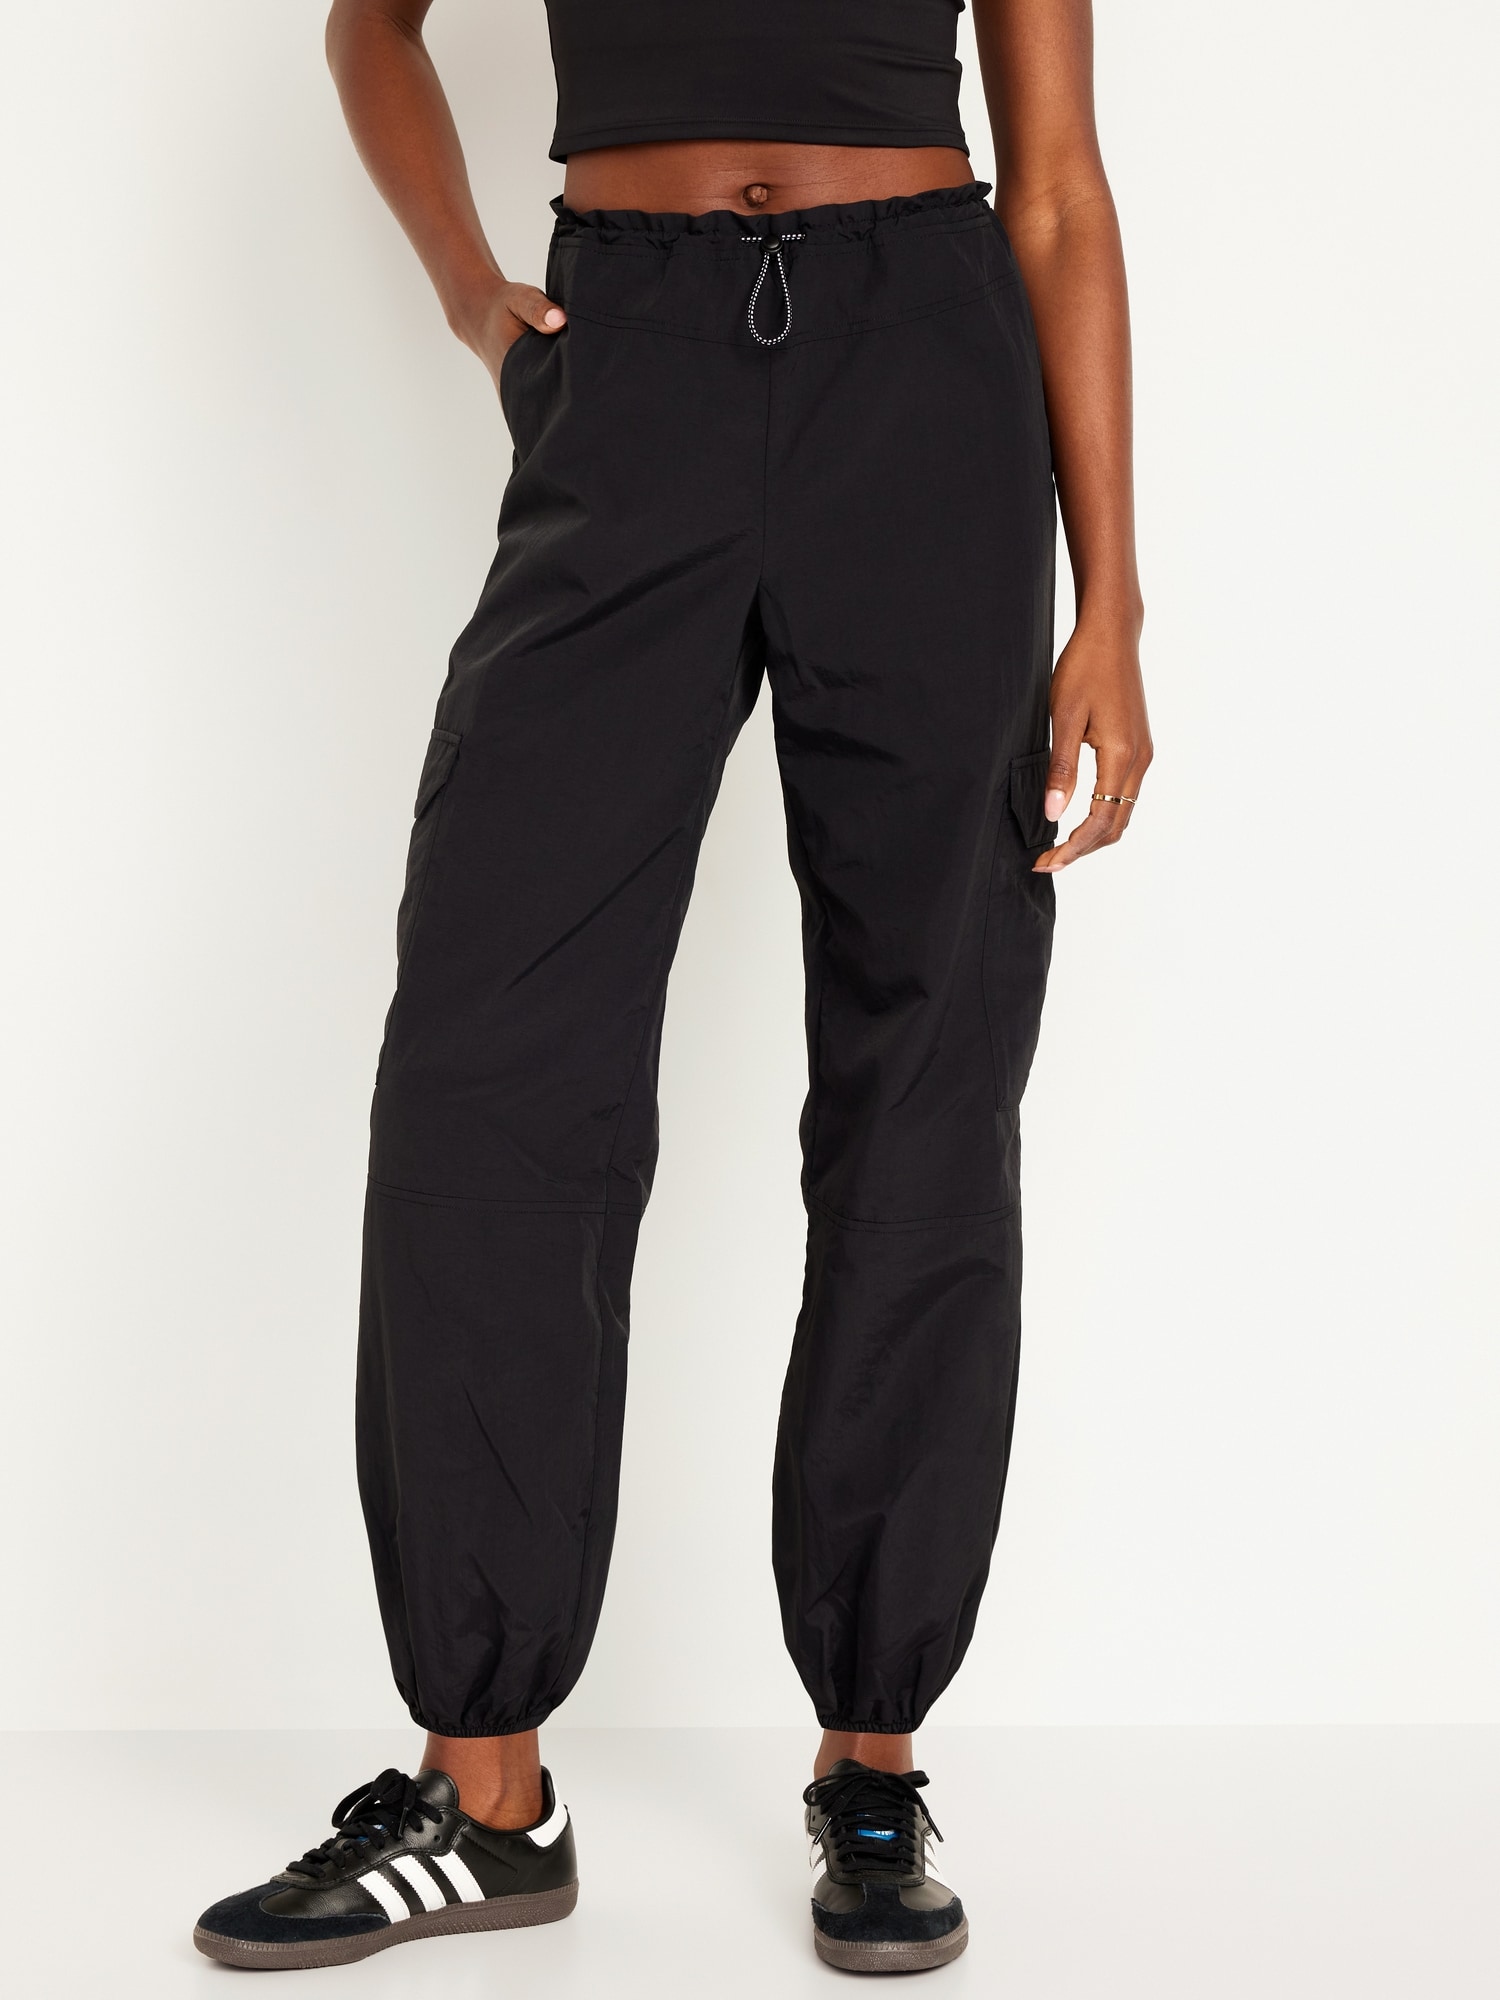 Old Navy, Pants & Jumpsuits, Old Navy Powersoft Activewear Black Joggers